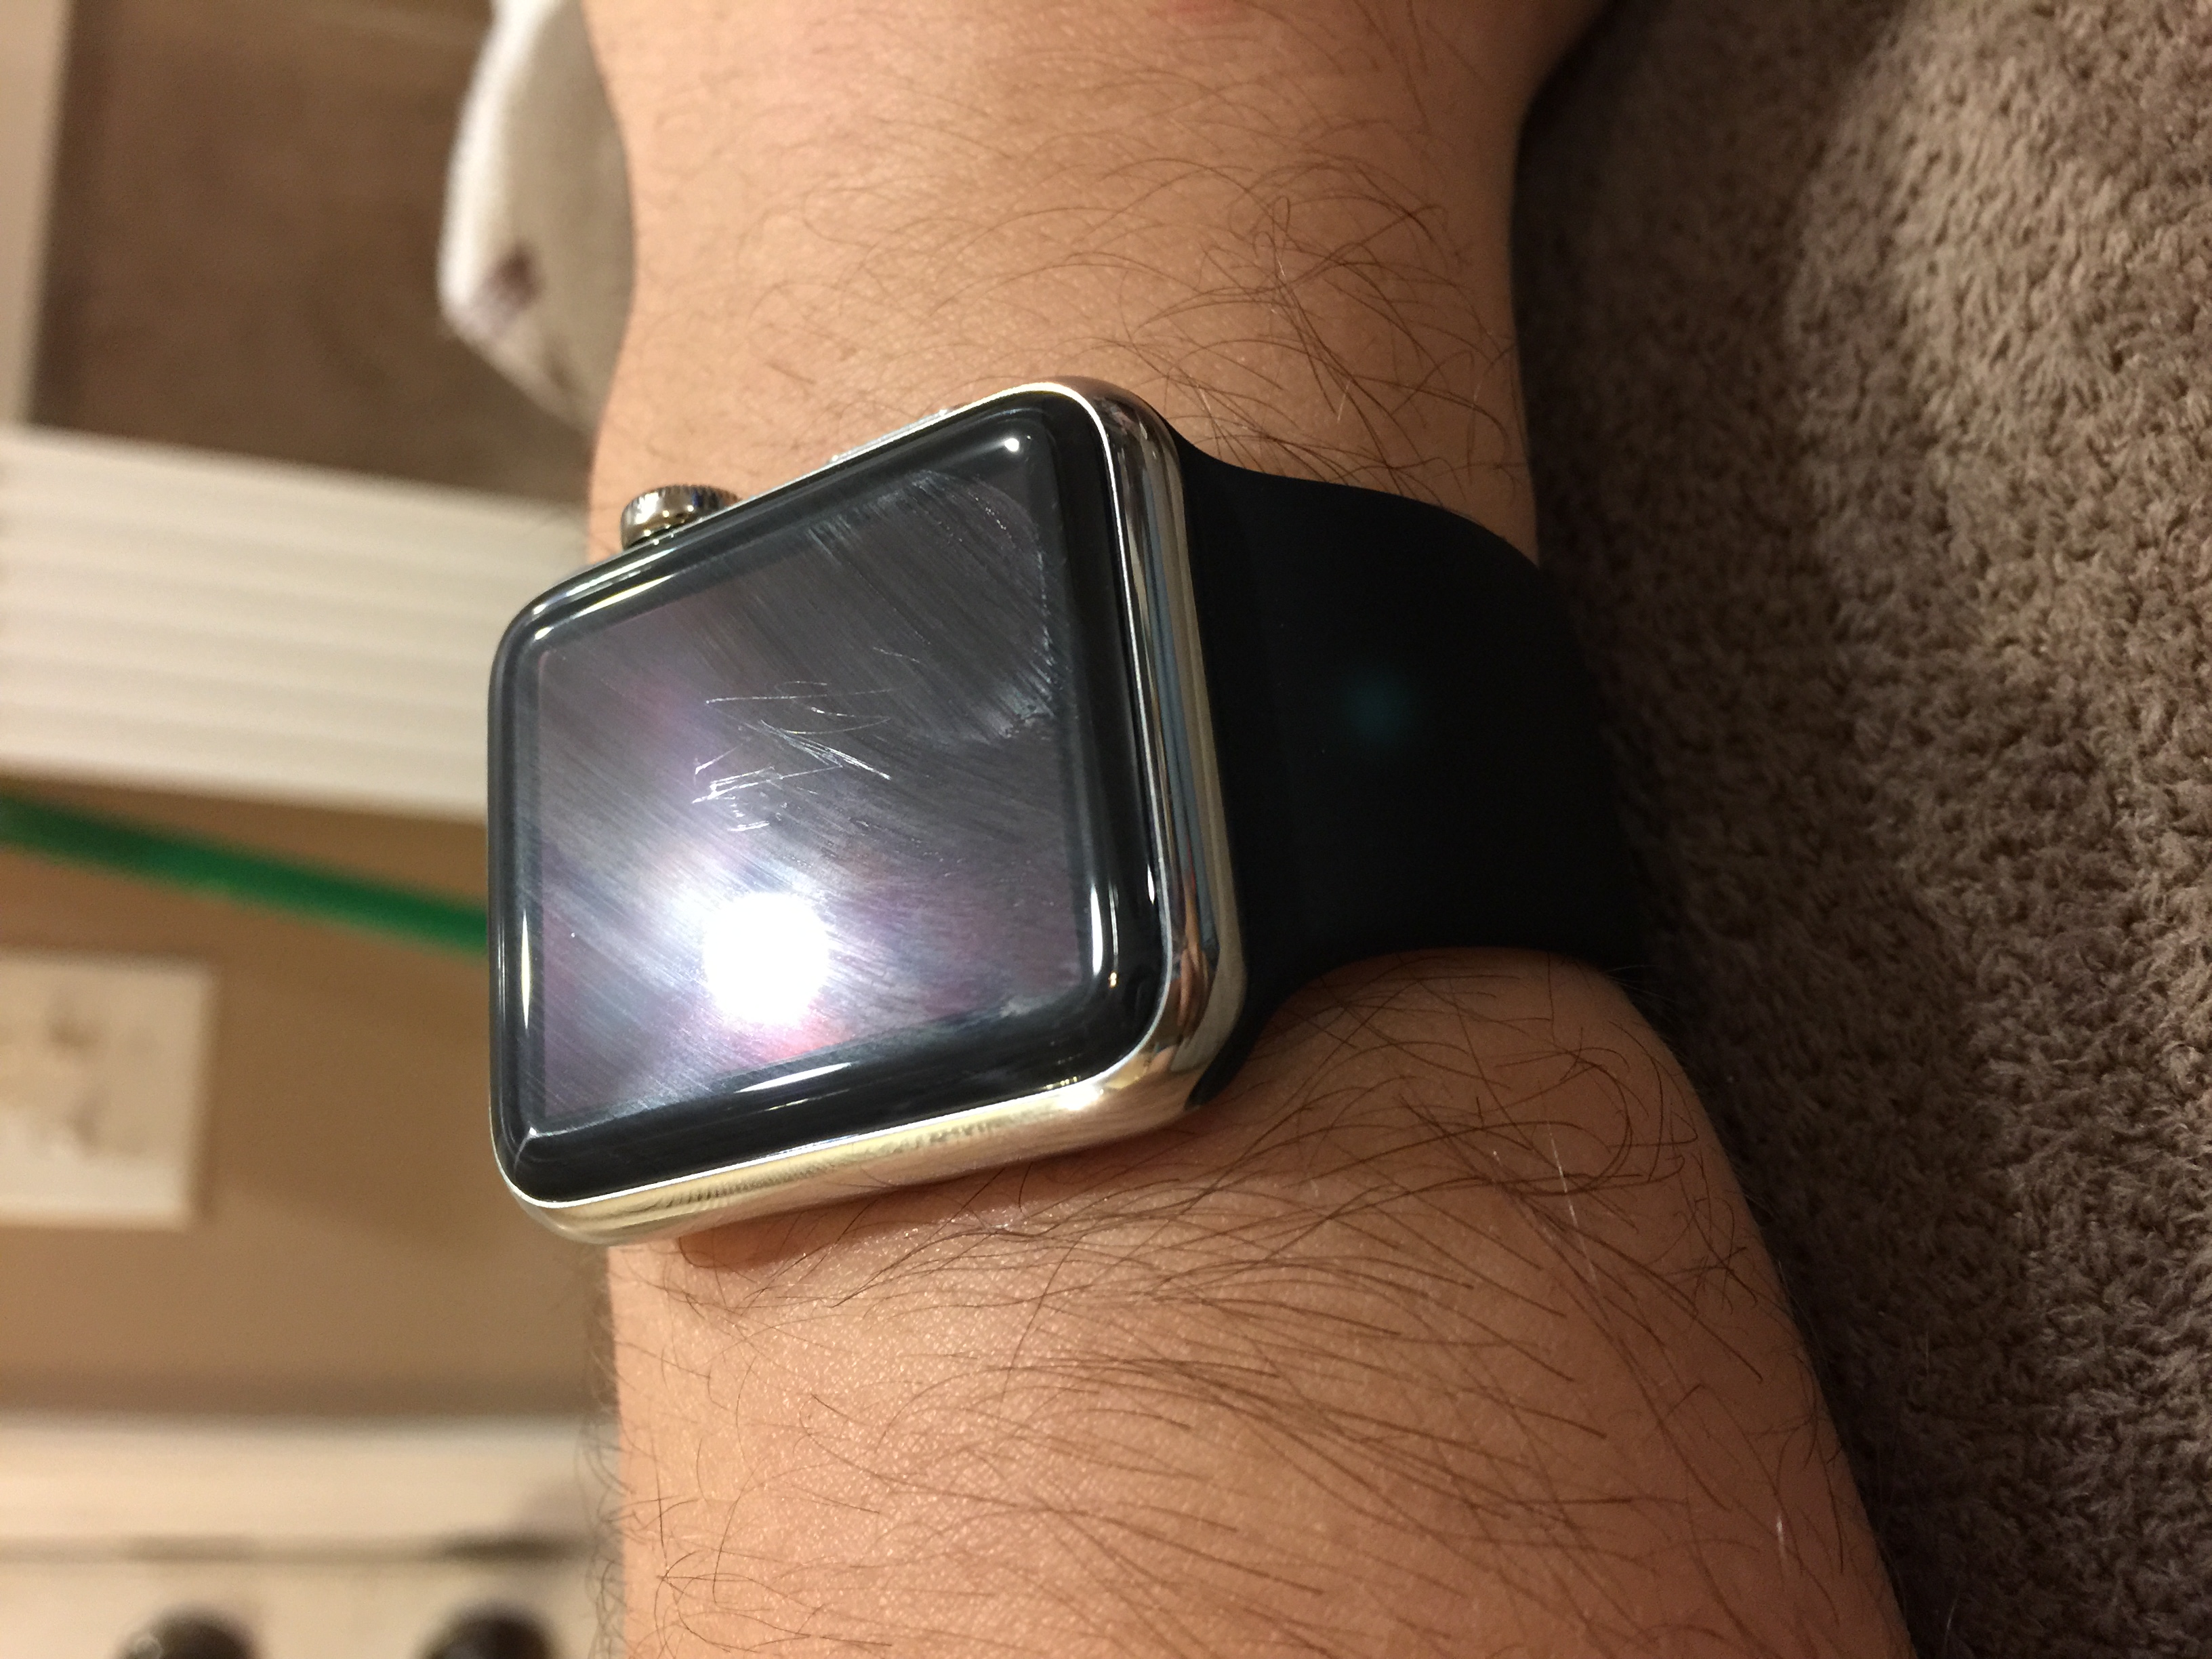 Scratched face on series 6 watch - Apple Community